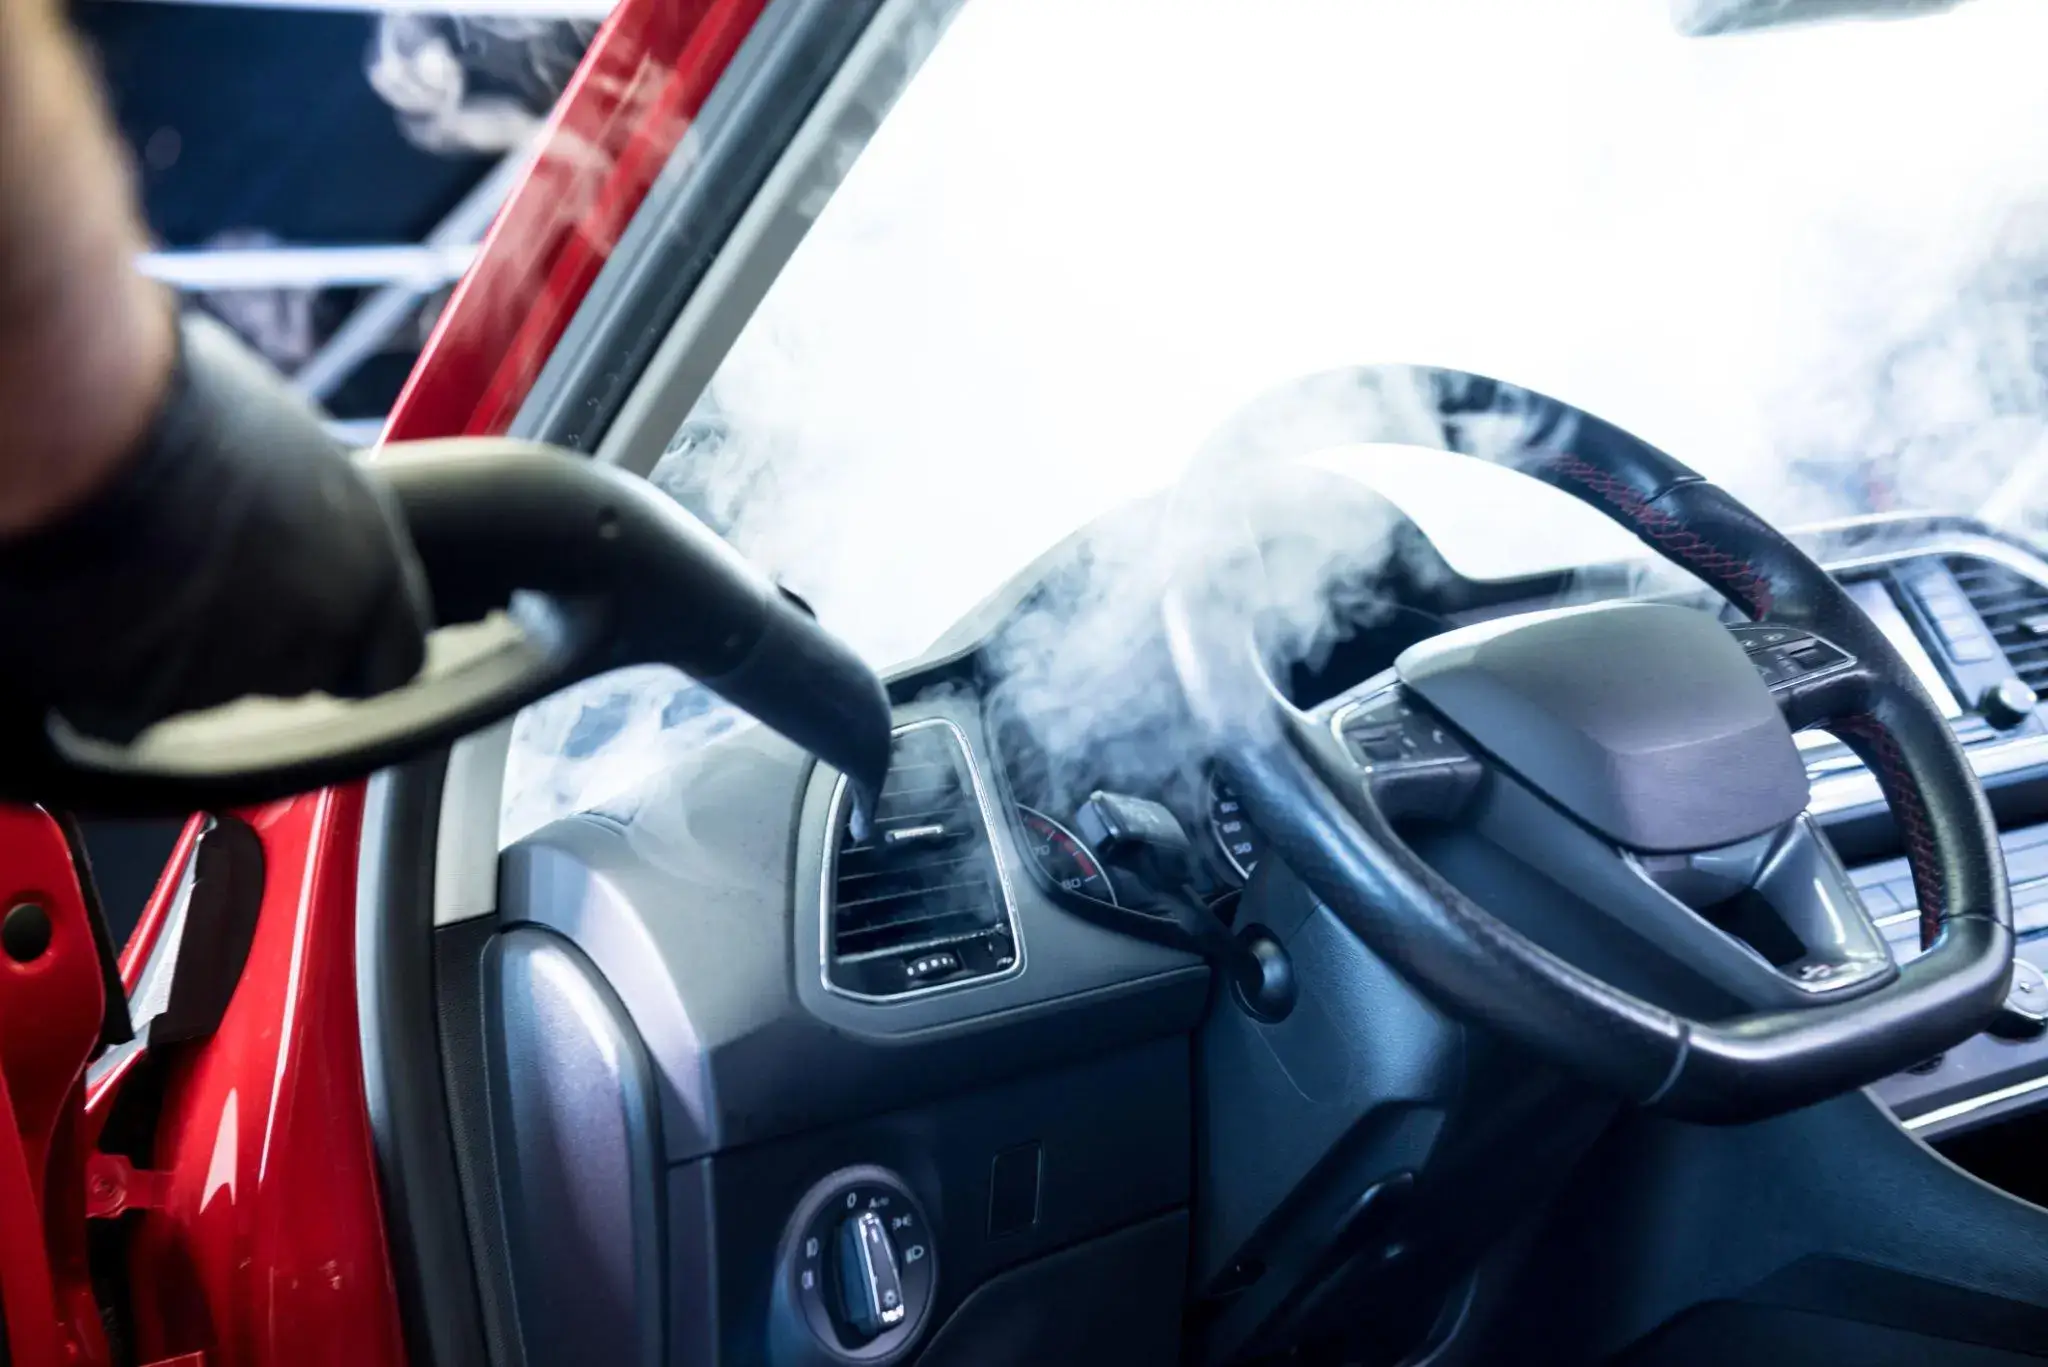 Driving can be more comfortable and enjoyable with a clean automobile interior.